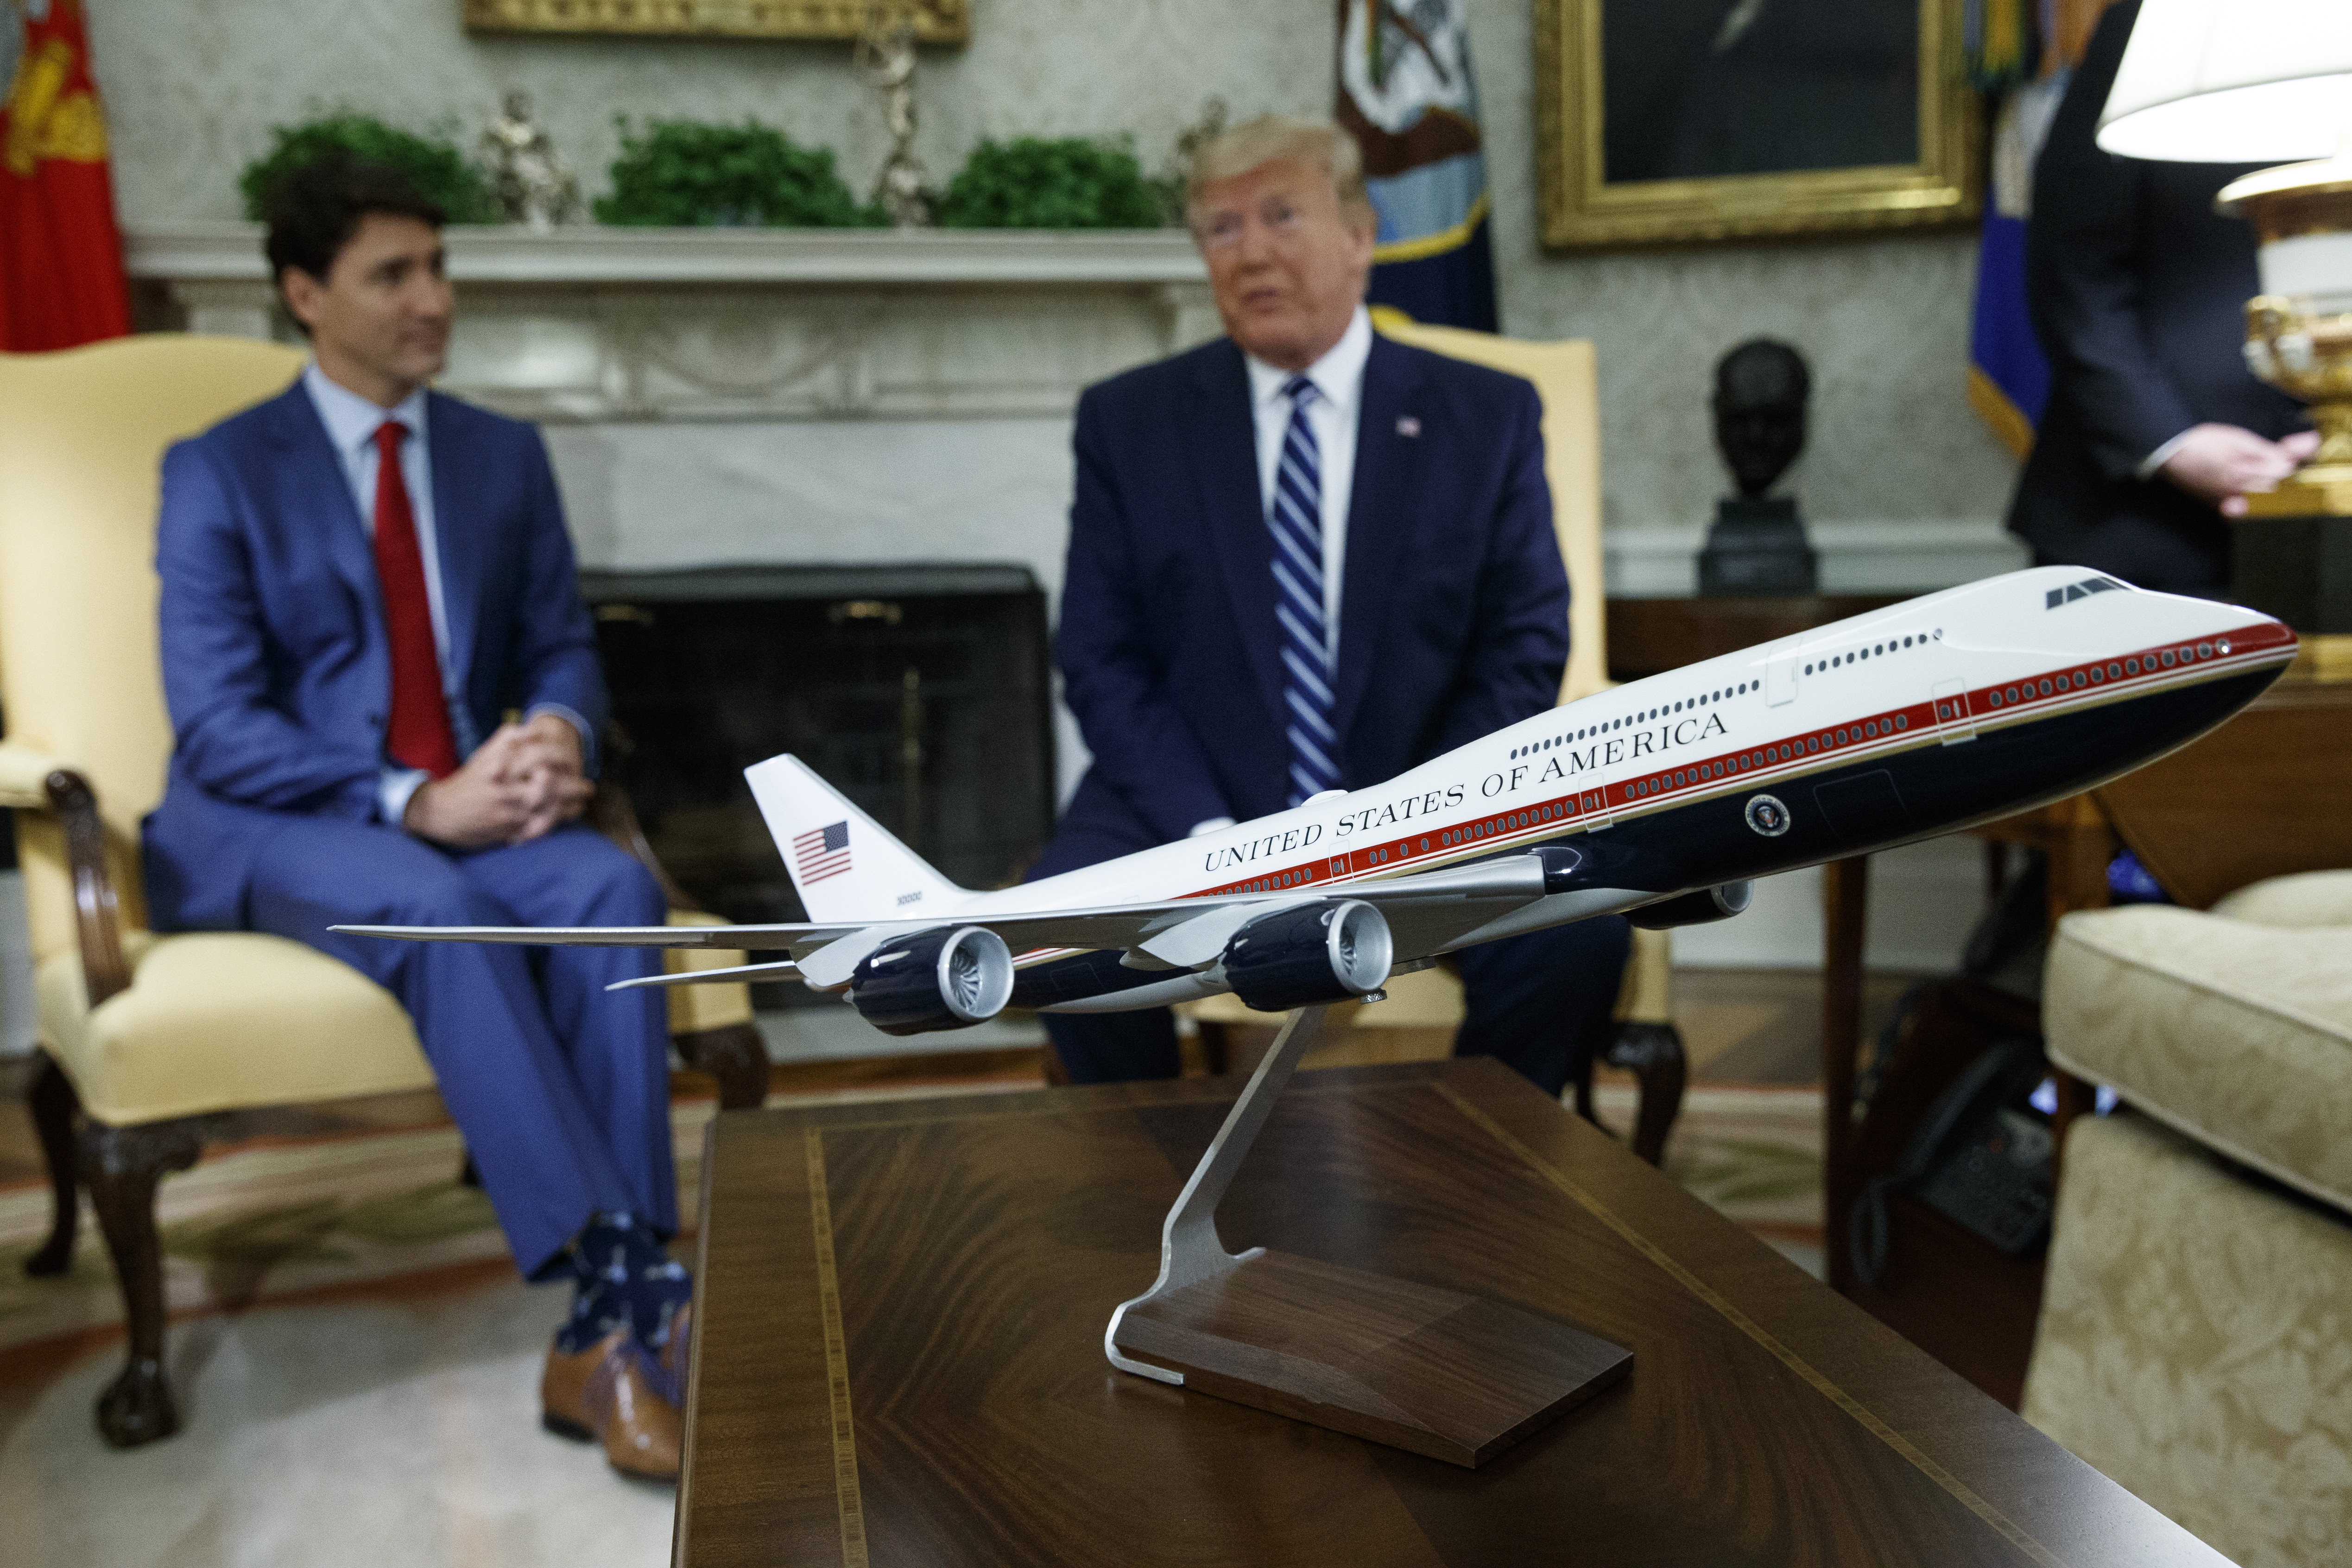 Making Air Force One great again